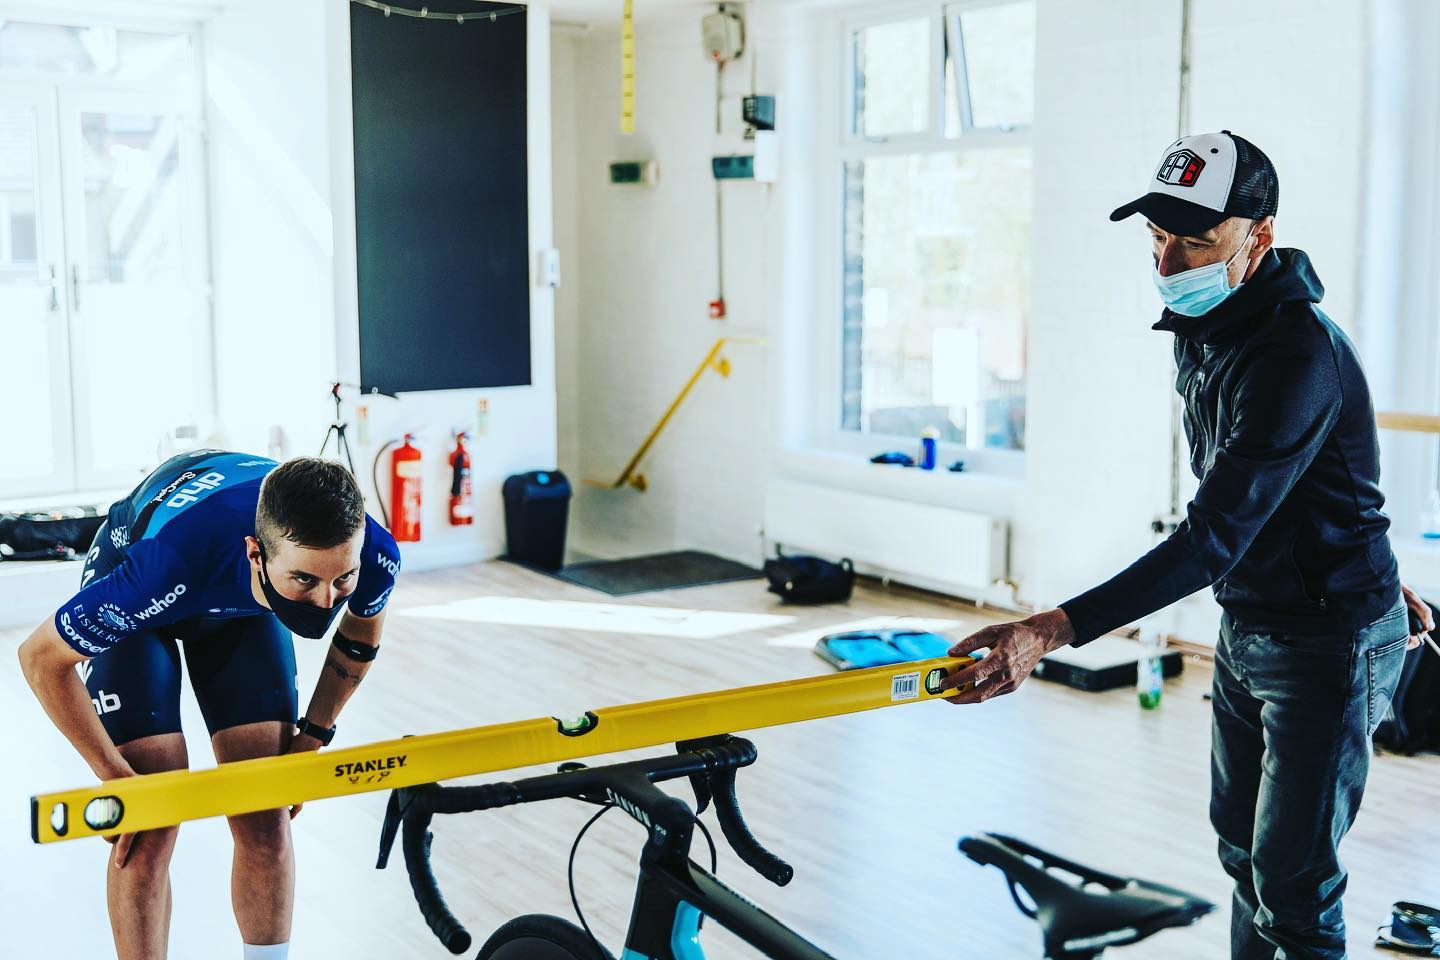 First appointments of the new year incoming @htfitness01 tomorrow.
.
Things we’d like to see more of in 2022:
.
1. More clients doing pre-purchase fits, eliminating the possibility of expensive/distressing errors 💰 
.
2. More foot-shaped cycling shoes and less shoes shaped like something you’d wear to the office 👞 
.
3. Cleat holes on said shoes being drilled 5mm further back on the last. @iamspecialized_road are excepted from this one.
.
4. Manufacturers not fitting the same 400mm proprietary seatpin they install on the XXL frame on the XXS model 🪚
.
5. Fewer integrated, non-adjustable cockpits. Yes, I know, never going to happen.
.
6. World peace. Also unlikely, sadly ✌️
.
📸 @lual22 @eltoromediadotcom 
.
#bikefit #bikefitting #bikefitter #wishlist #ripponden #calderdale #calderfornia #holmfirth #cycling #cyclist #cyclinglife